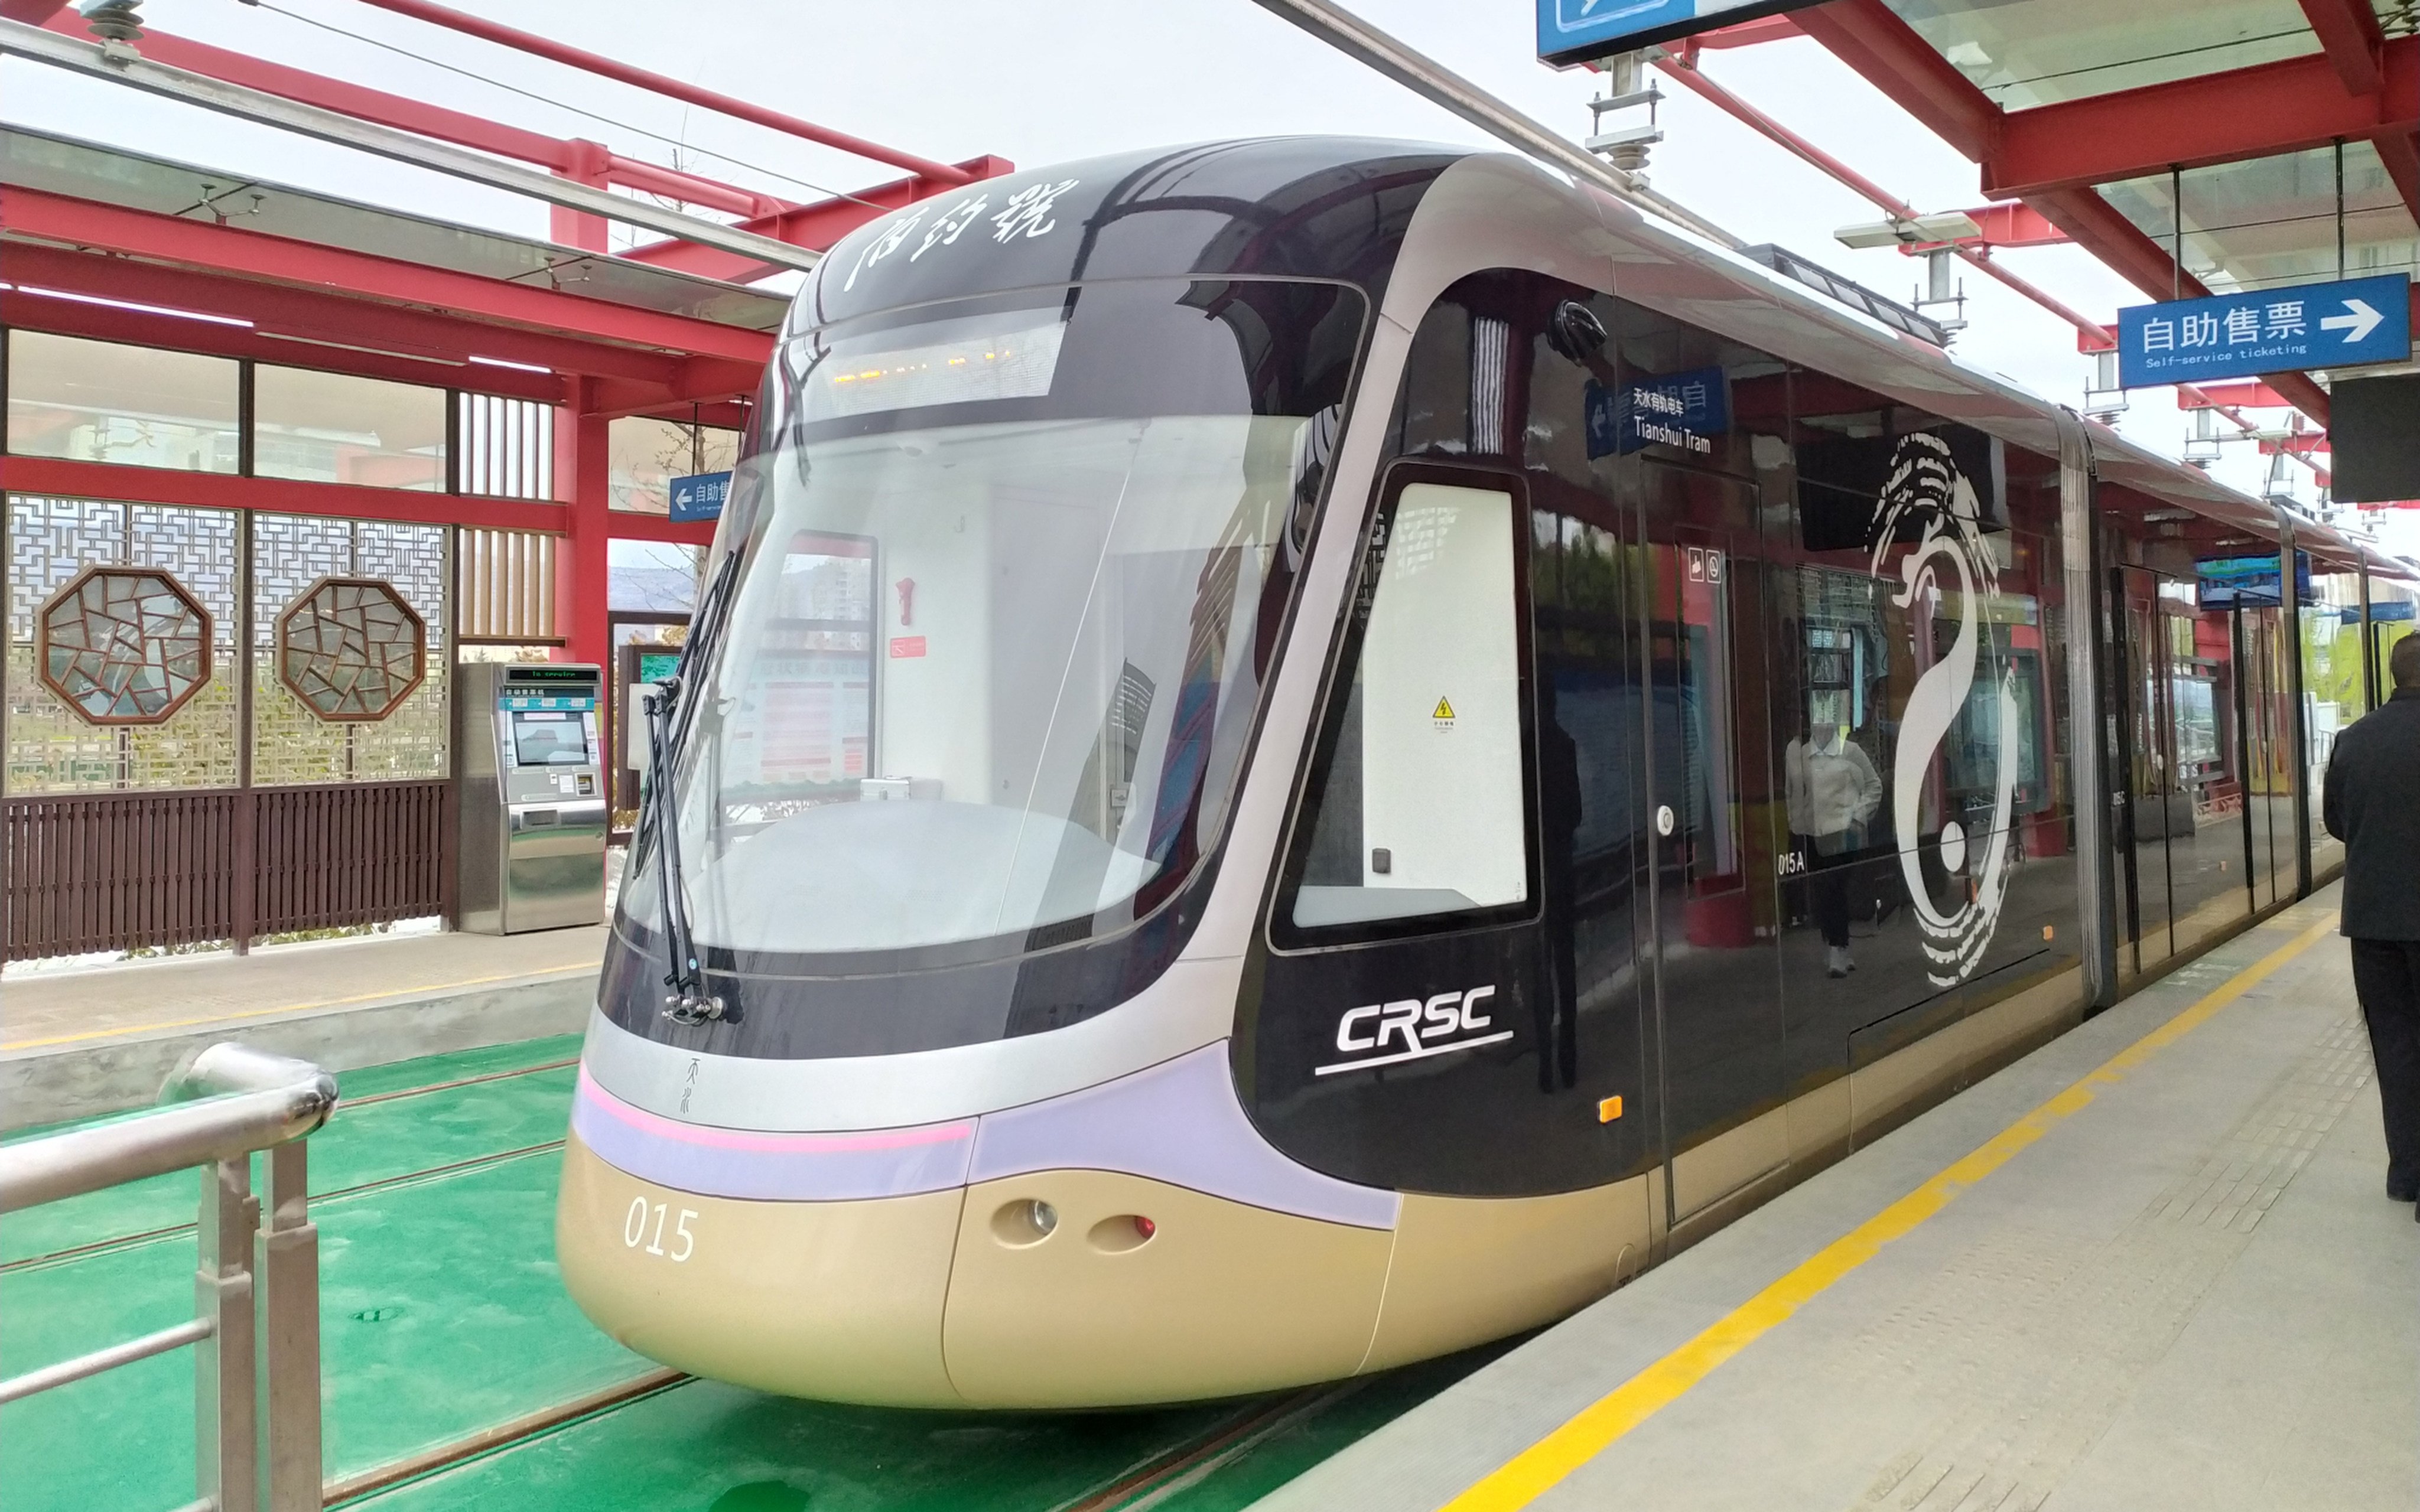 The first phase of Tianshui’s tram line, which began operations in May 2020, only had an average of 800,000 passengers a year, generating around 1.6 million yuan of yearly income. Photo: Handout